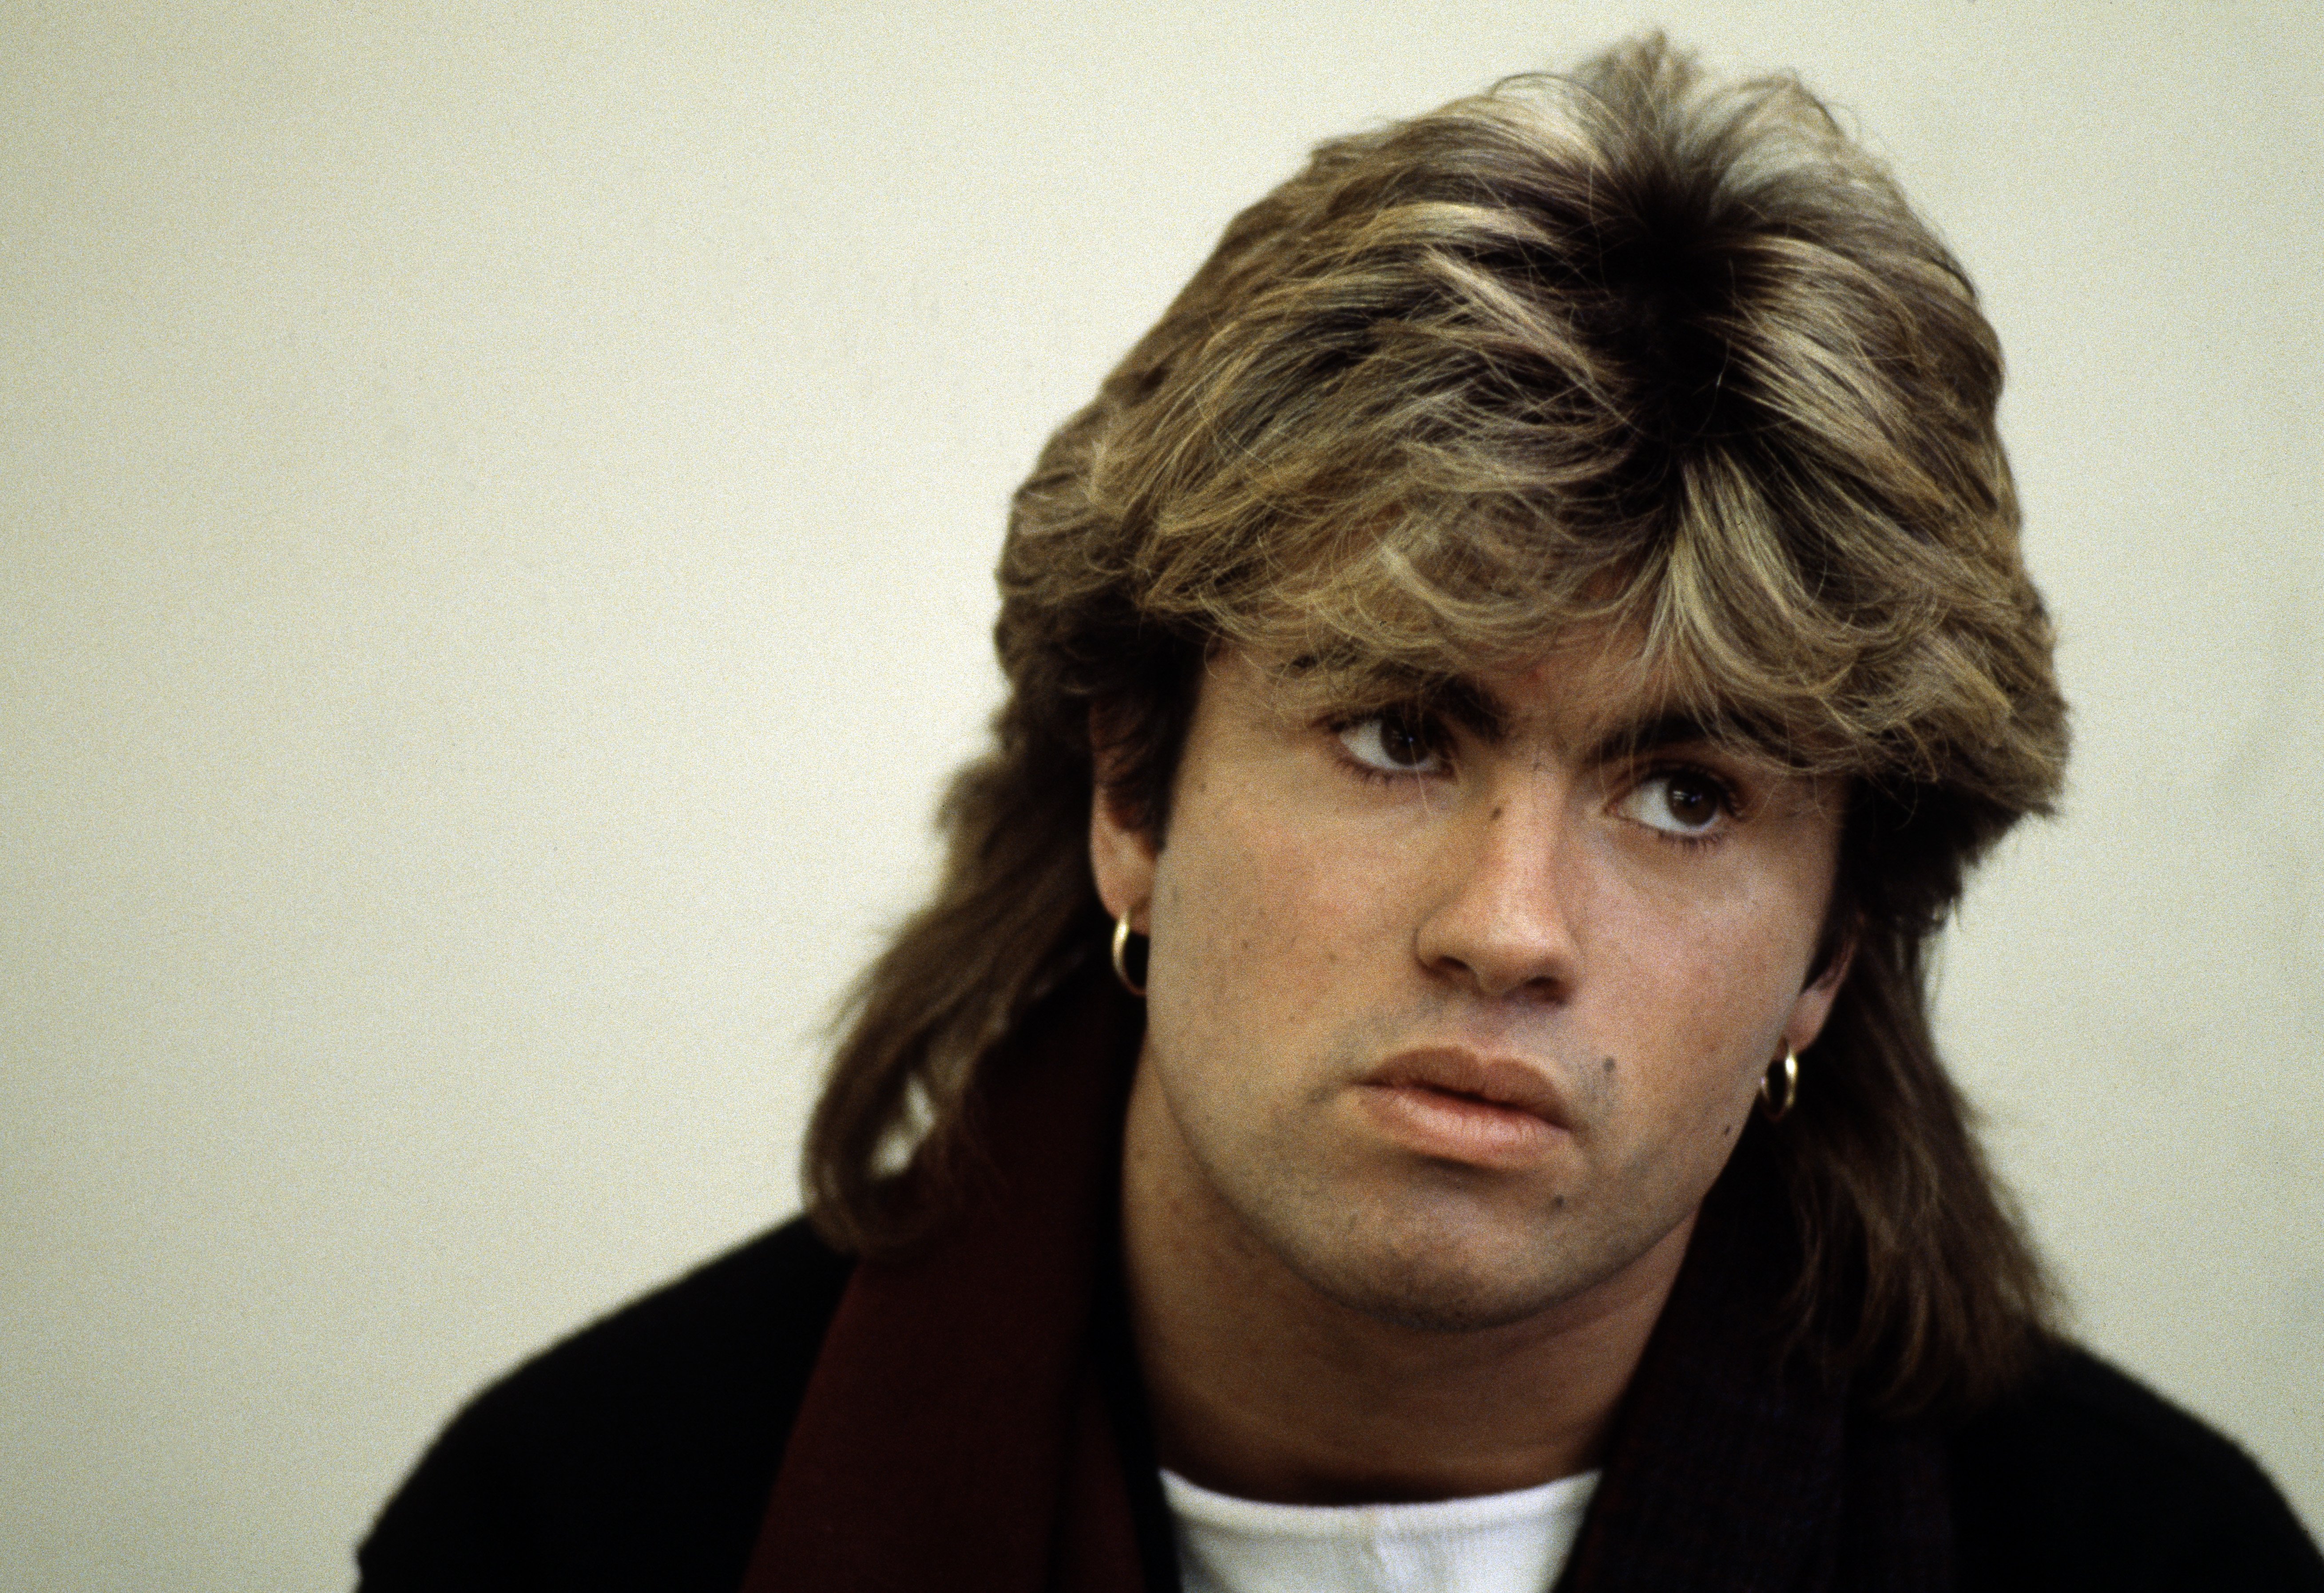 Singer-songwriter George Michael in Japan, circa 1985. | Source: Getty Images